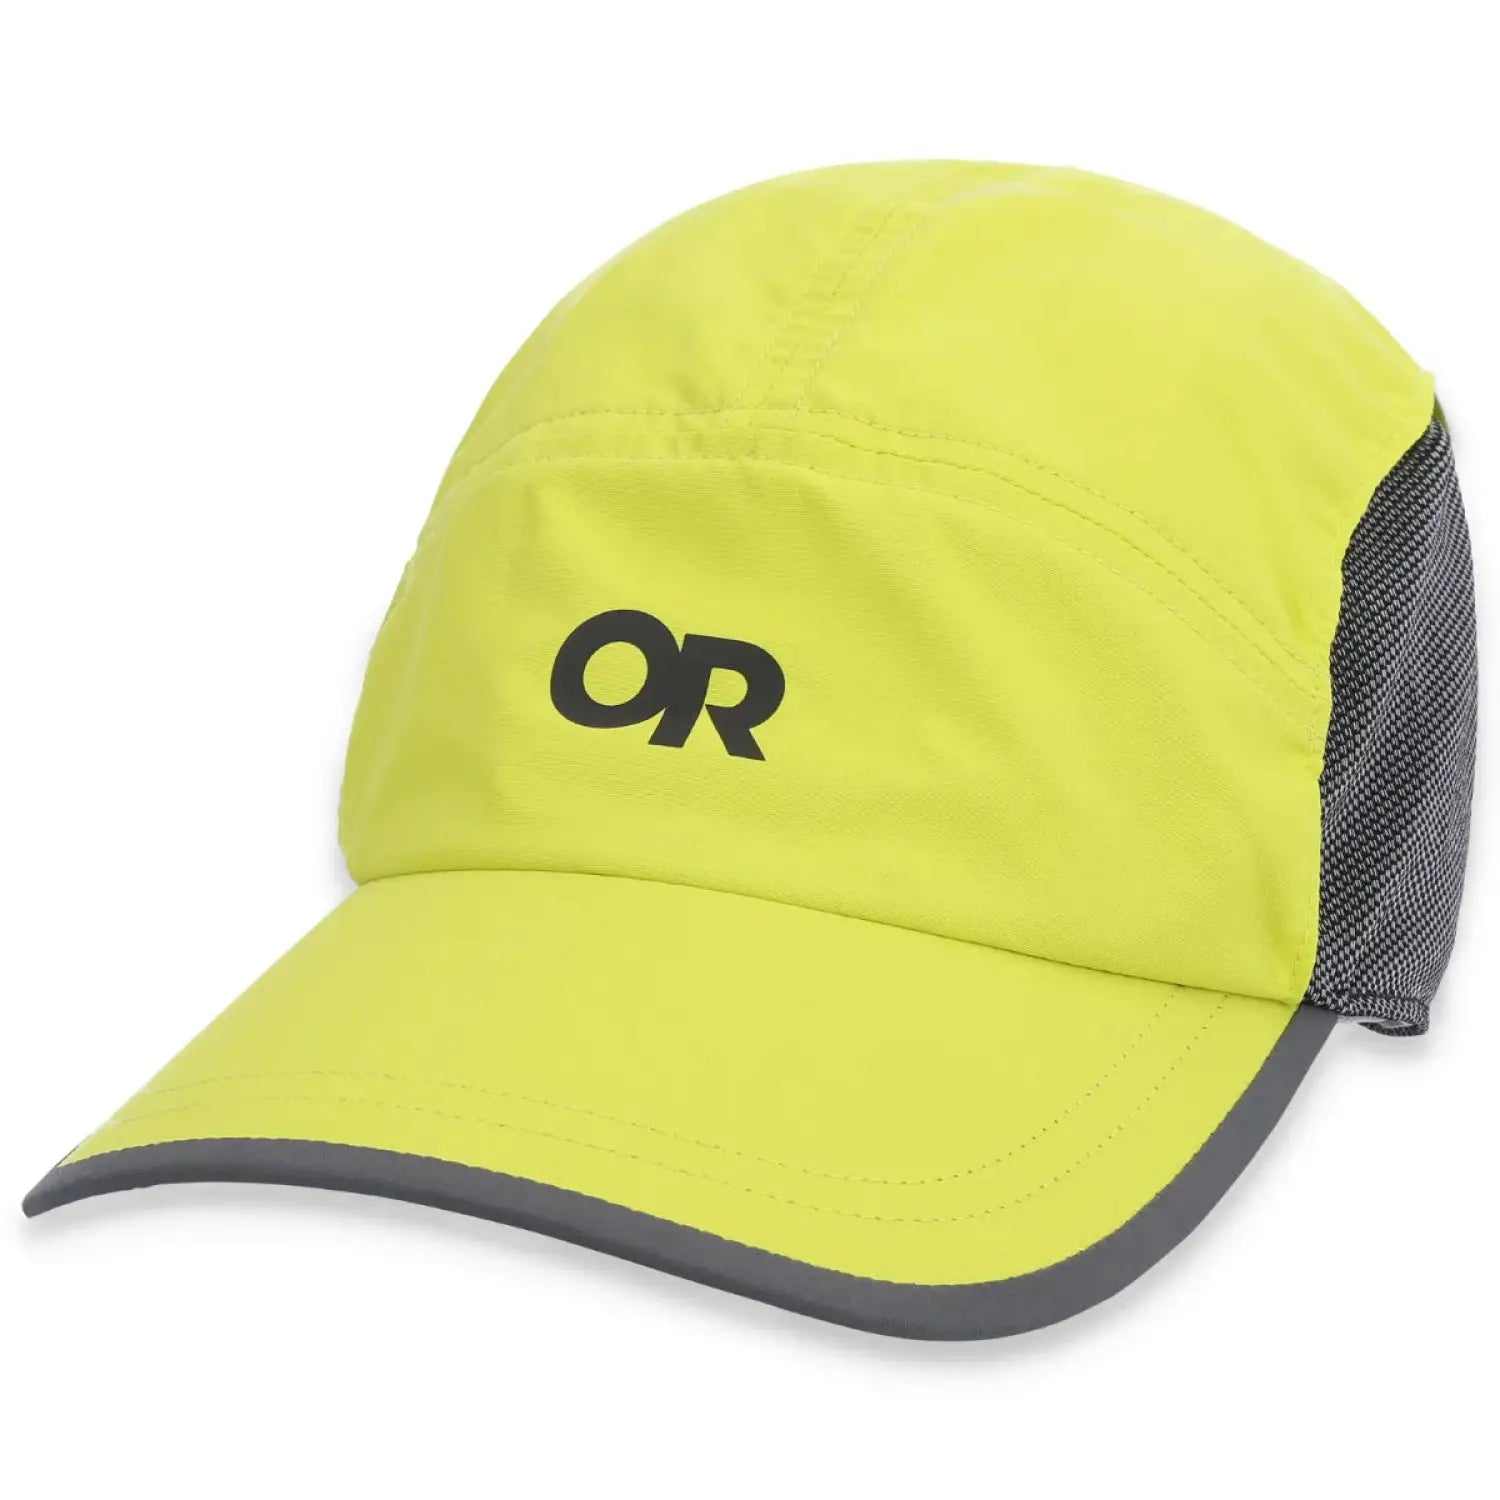 Outdoor Research Swift Cap, Sulphur Reflective, front view 